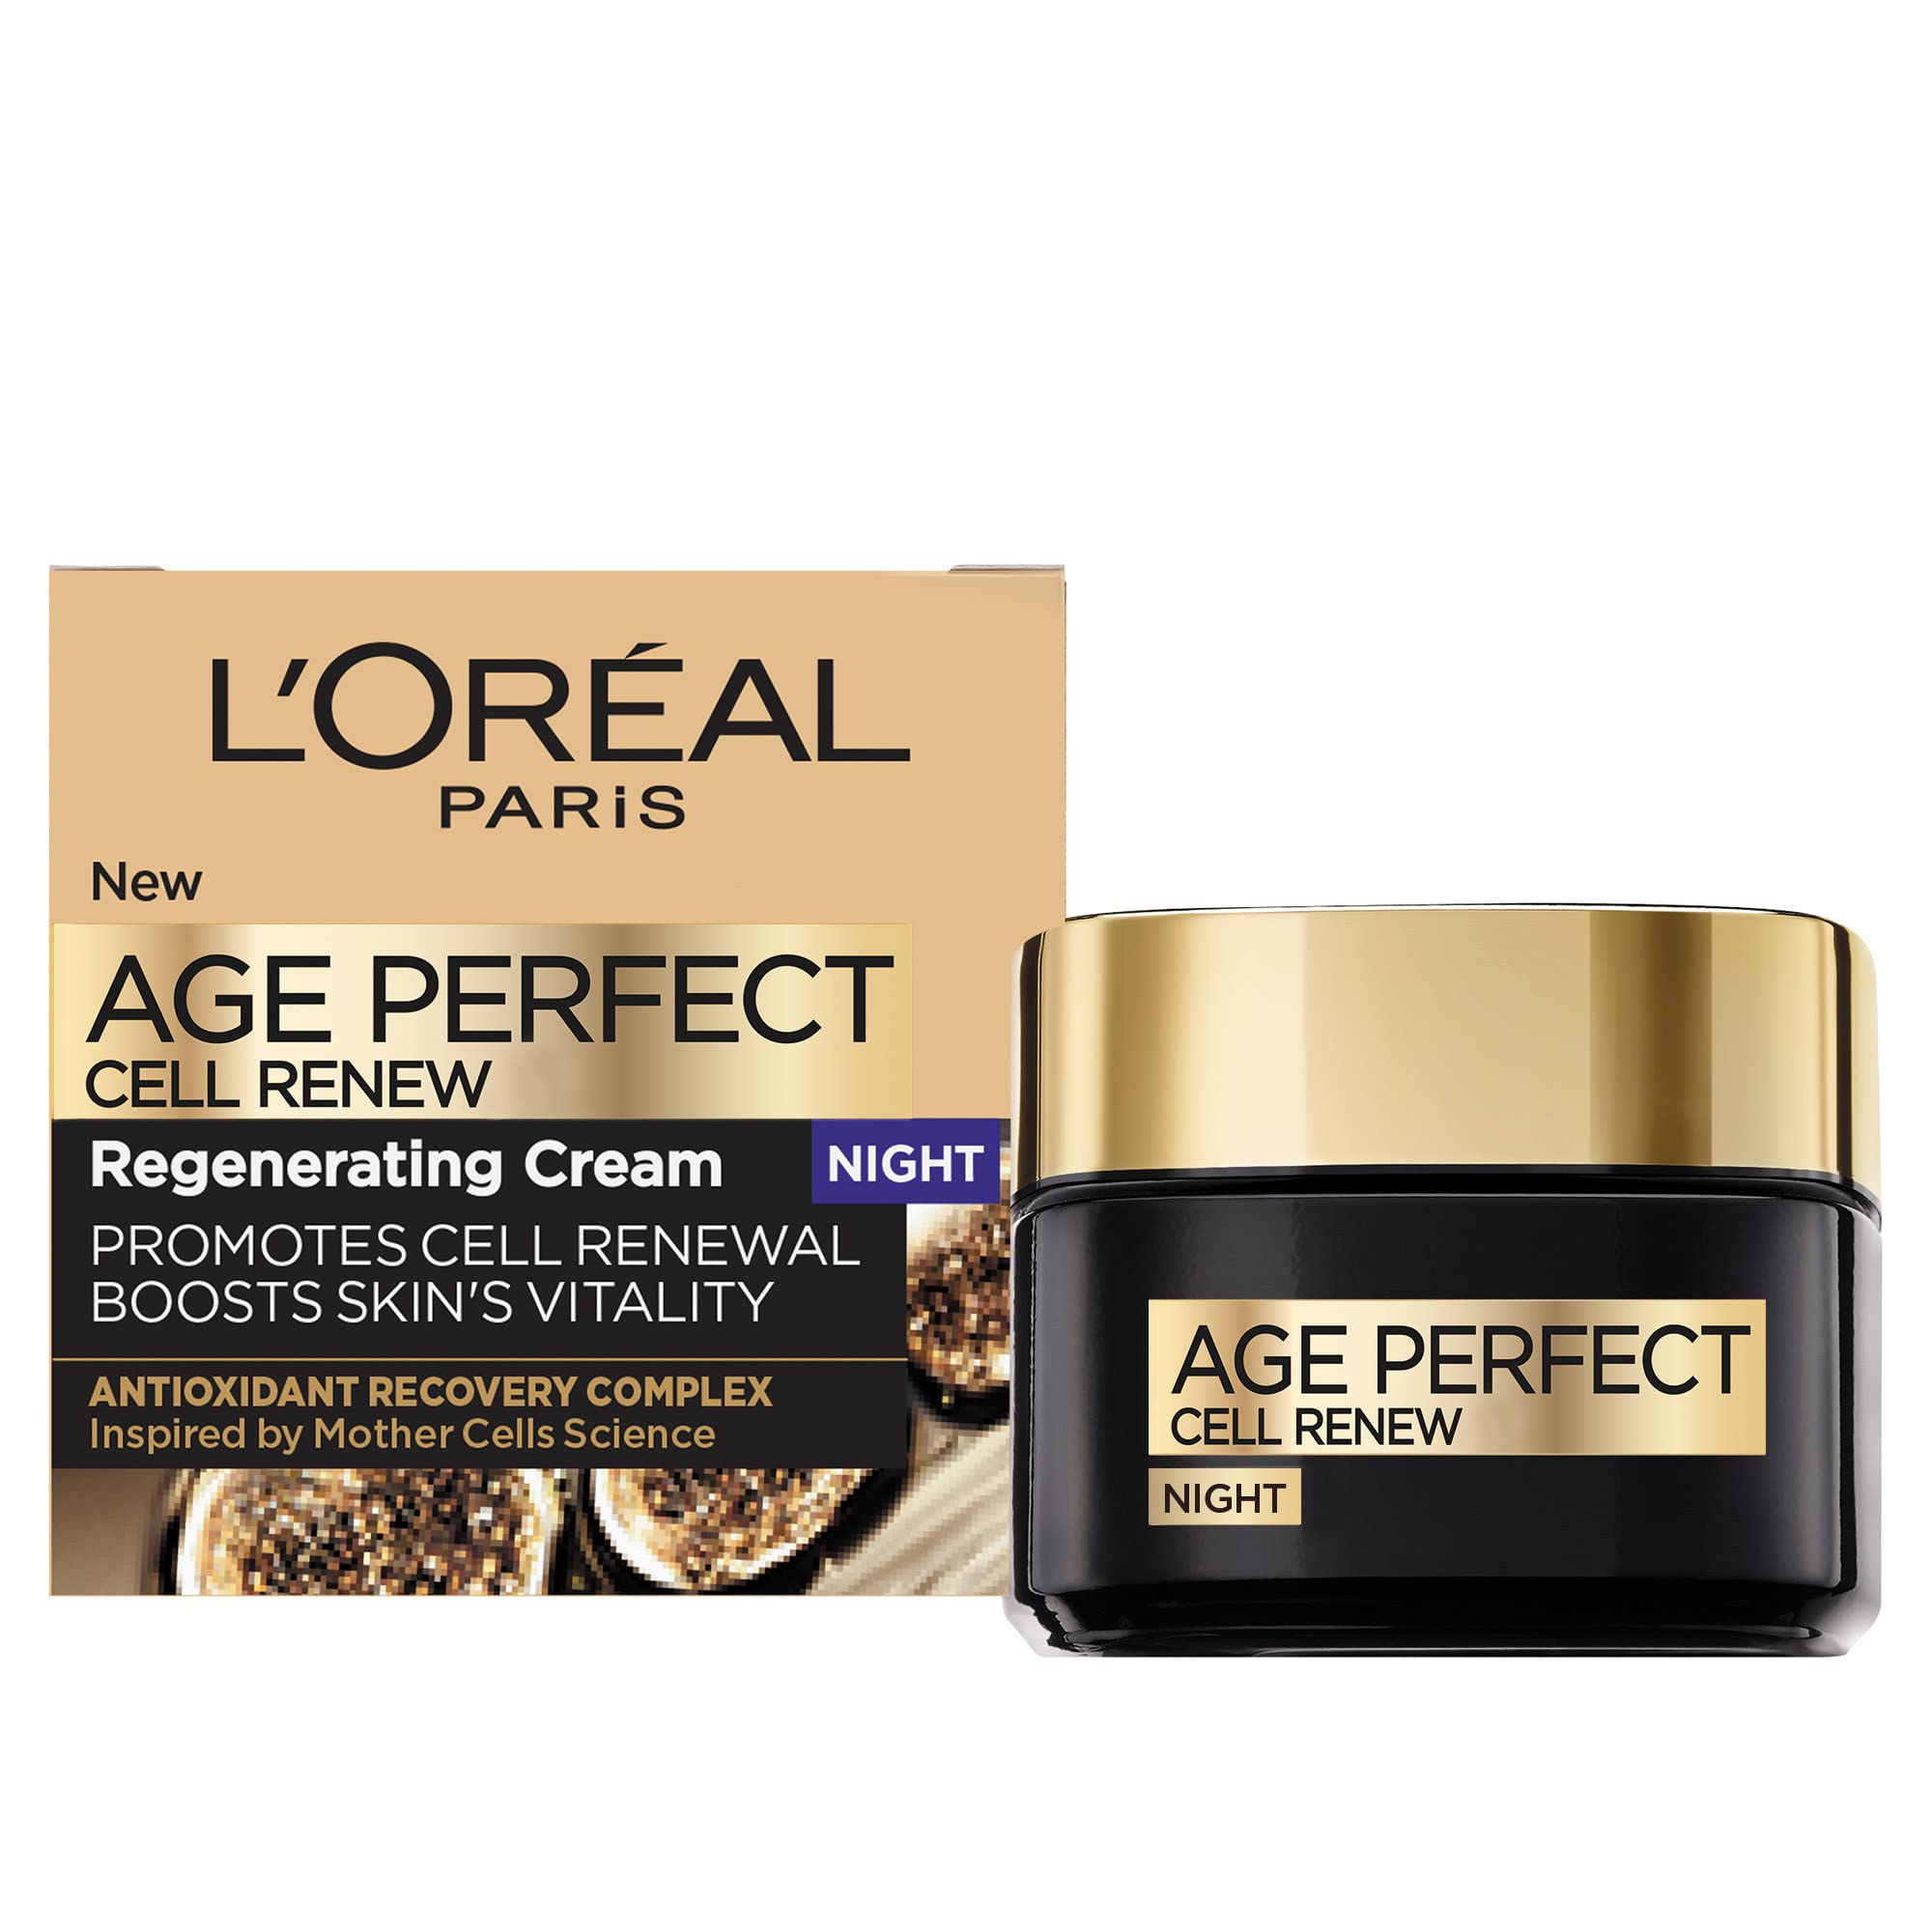 L'Oreal Paris Cell Renew Night Cream, Age Perfect Anti-Oxidant Recovery Complex Night Cream For Anti- Wrinkle, Firmness And Vitality, 50ml